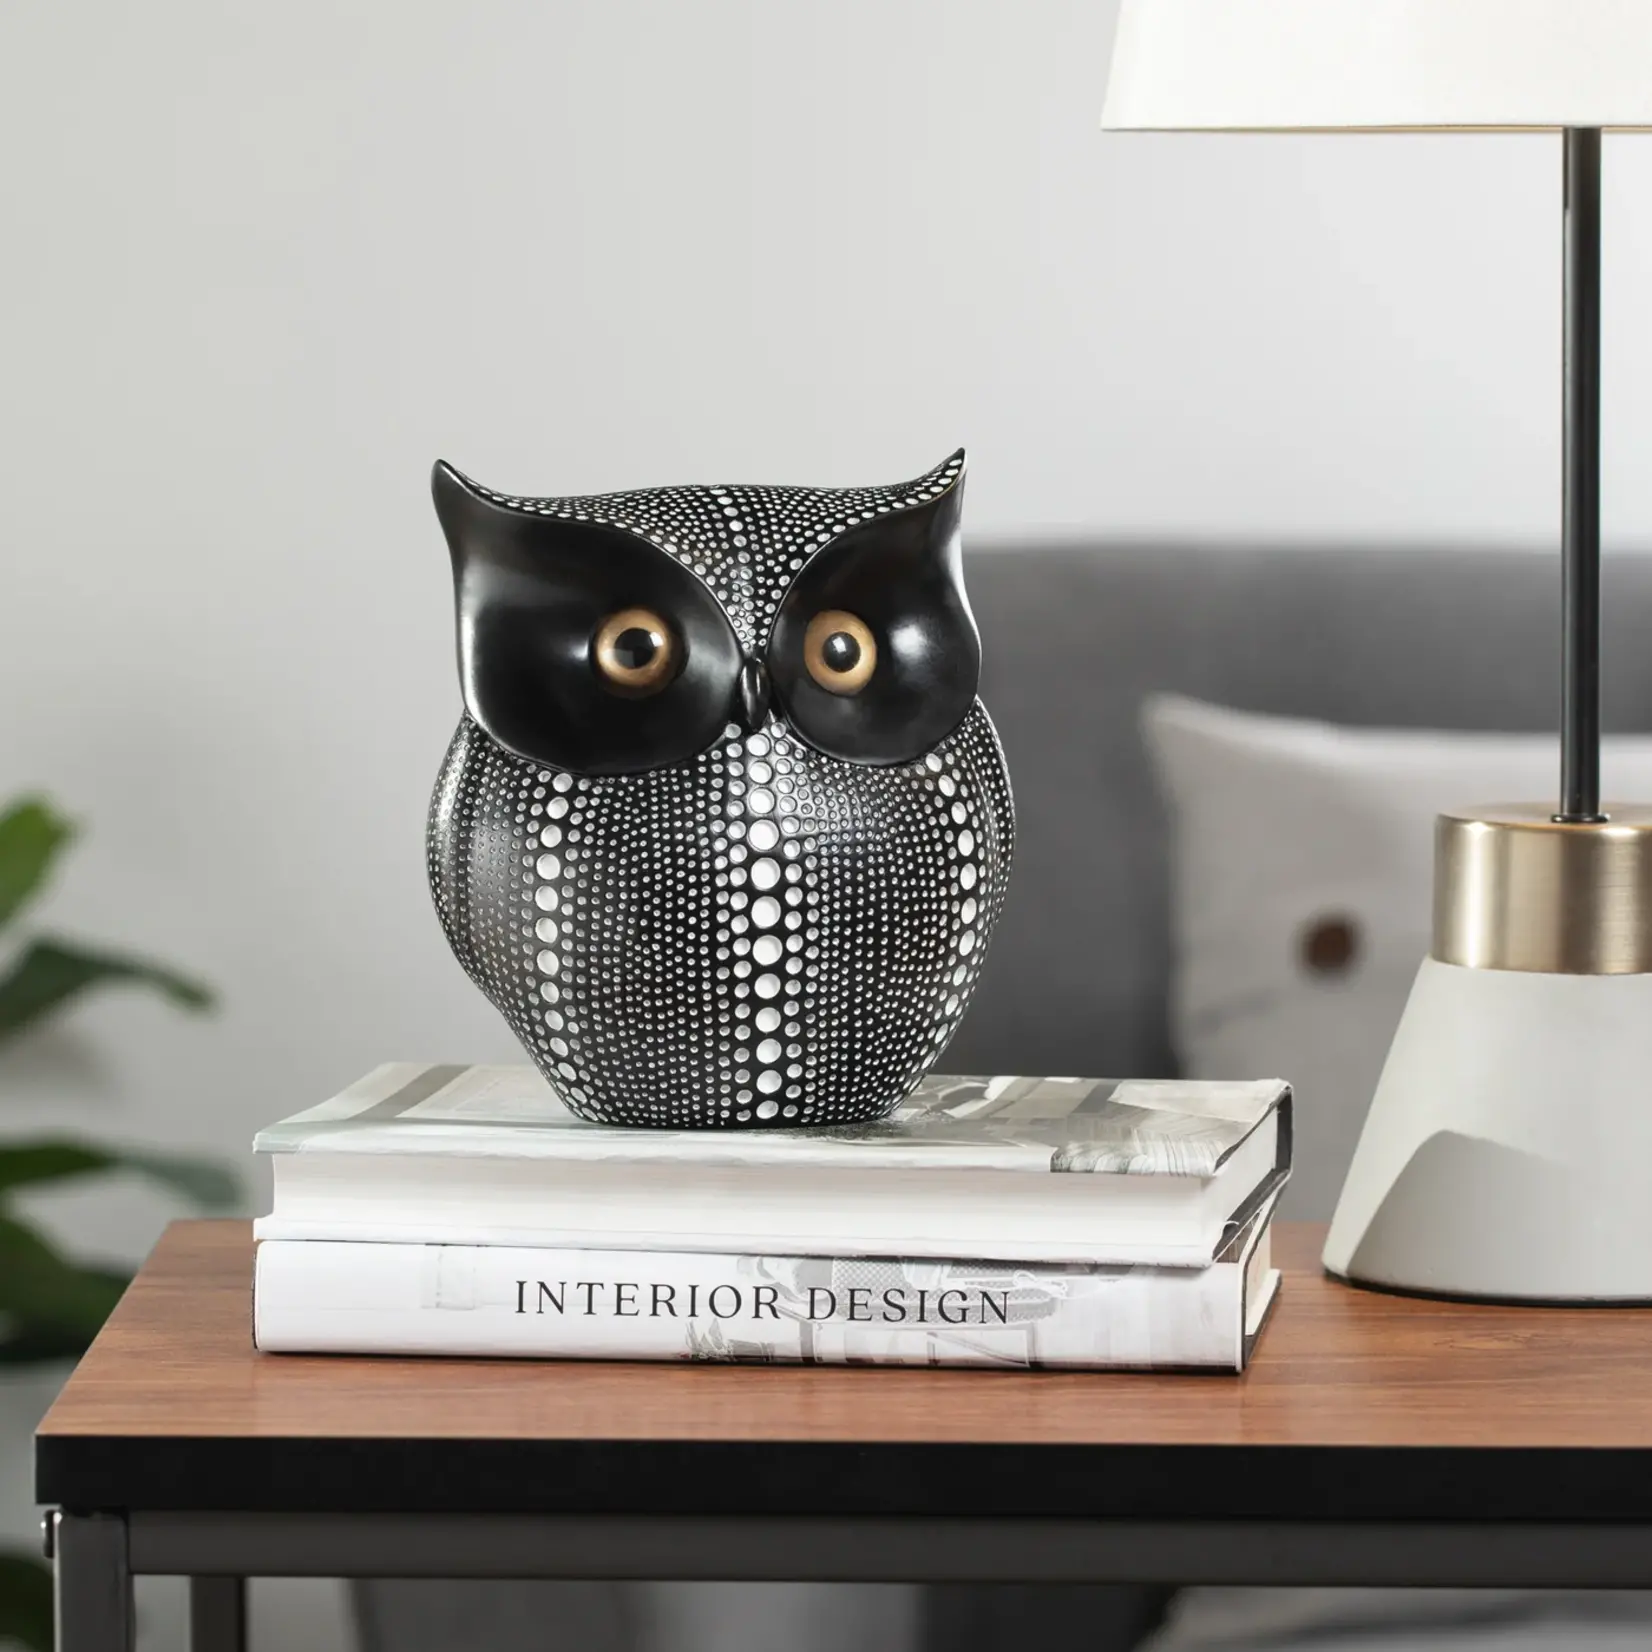 Torre & Tagus Dotted Horned Owl - Black